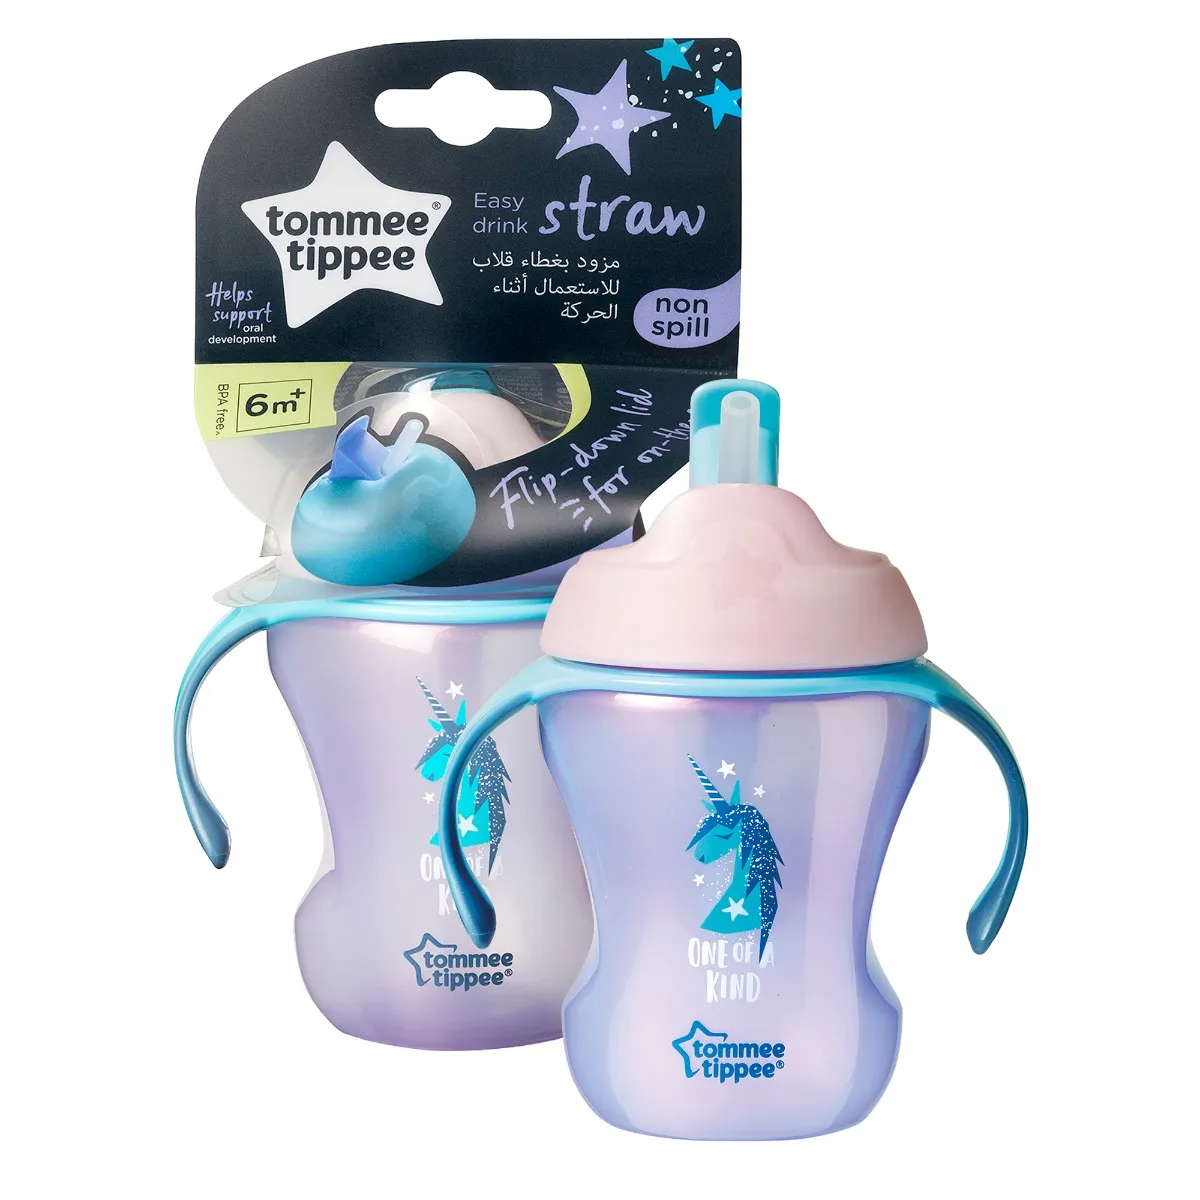 Cana Explora Easy Drink cu pai Roz 6 luni+, 230ml, Tommee Tippee